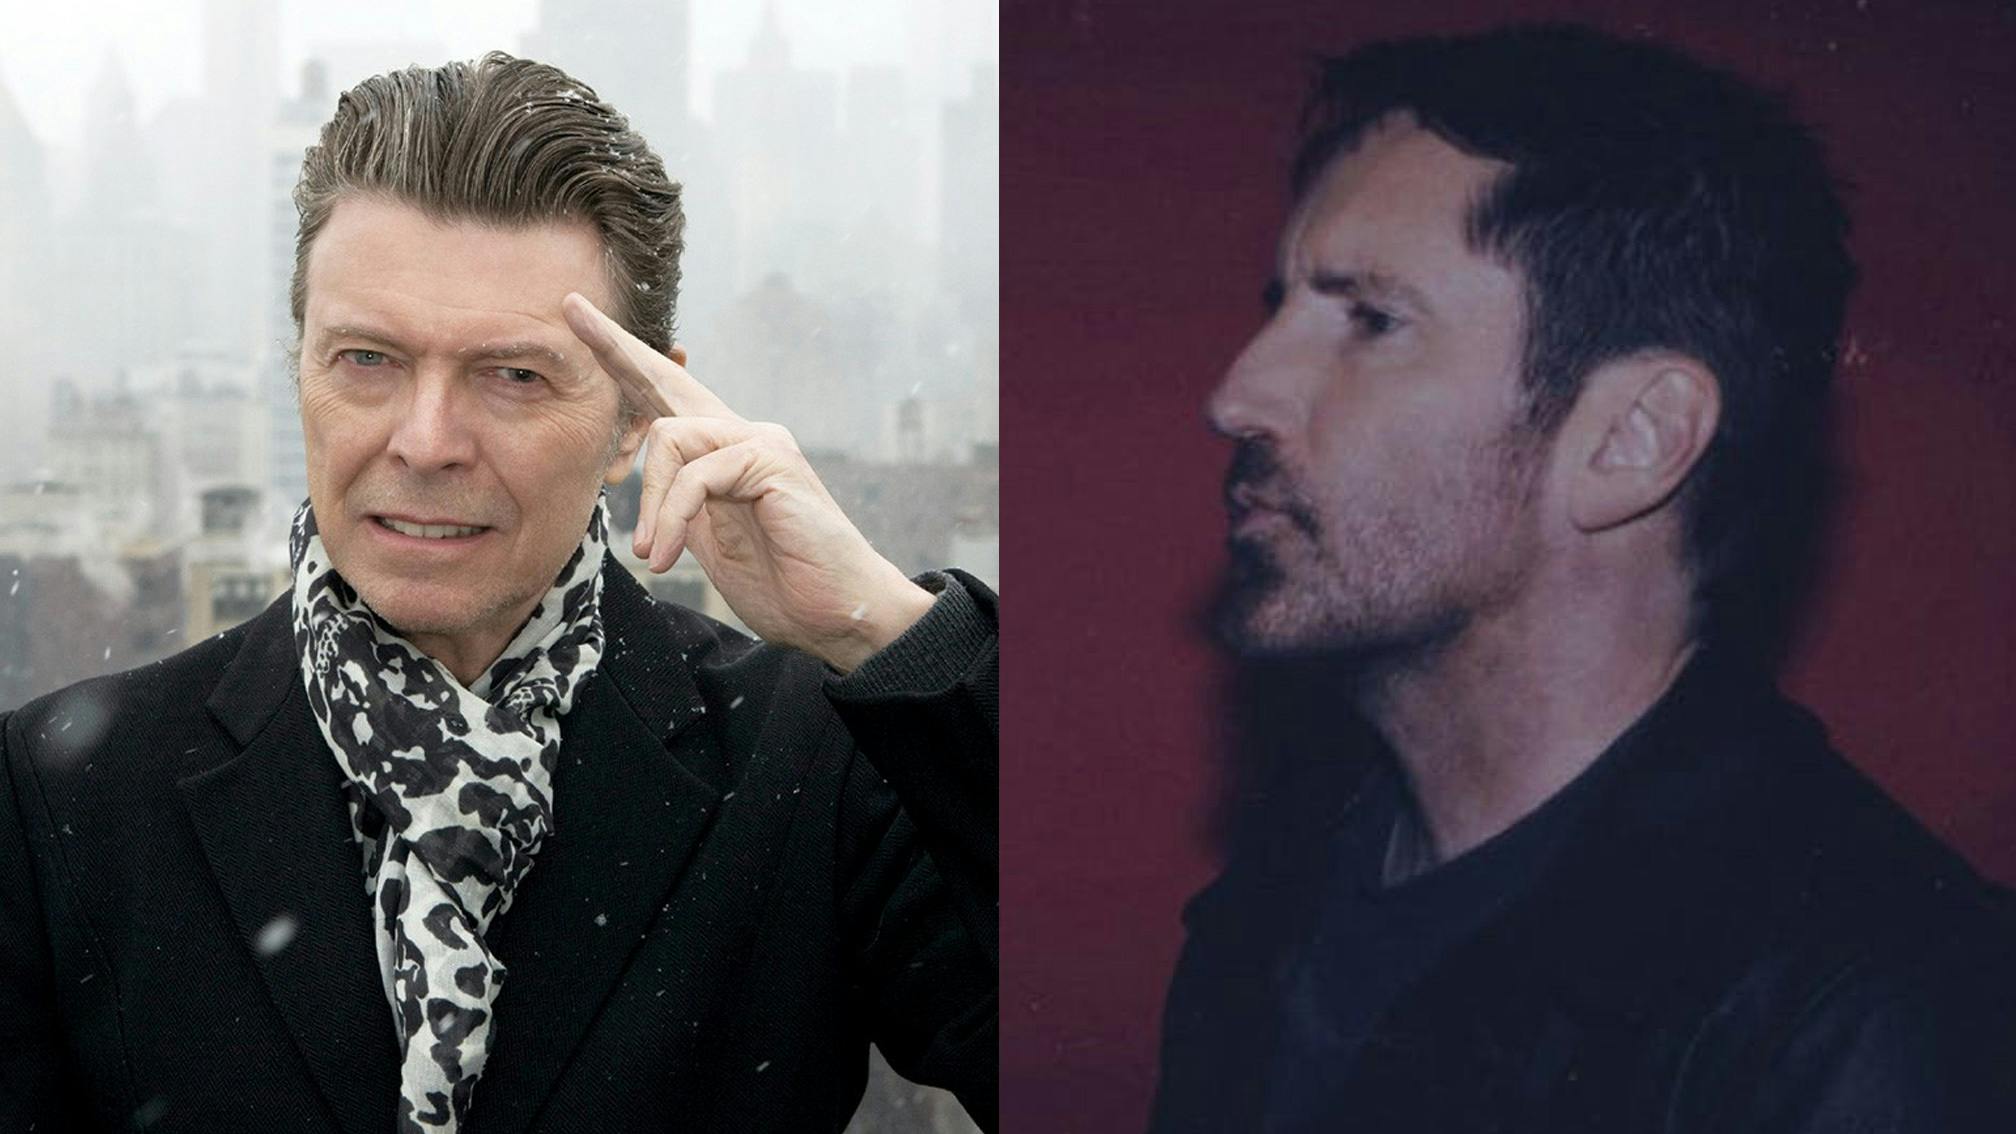 Trent Reznor pays tribute to David Bowie: "He helped me in those dark times before I chose to get my sh*t together"